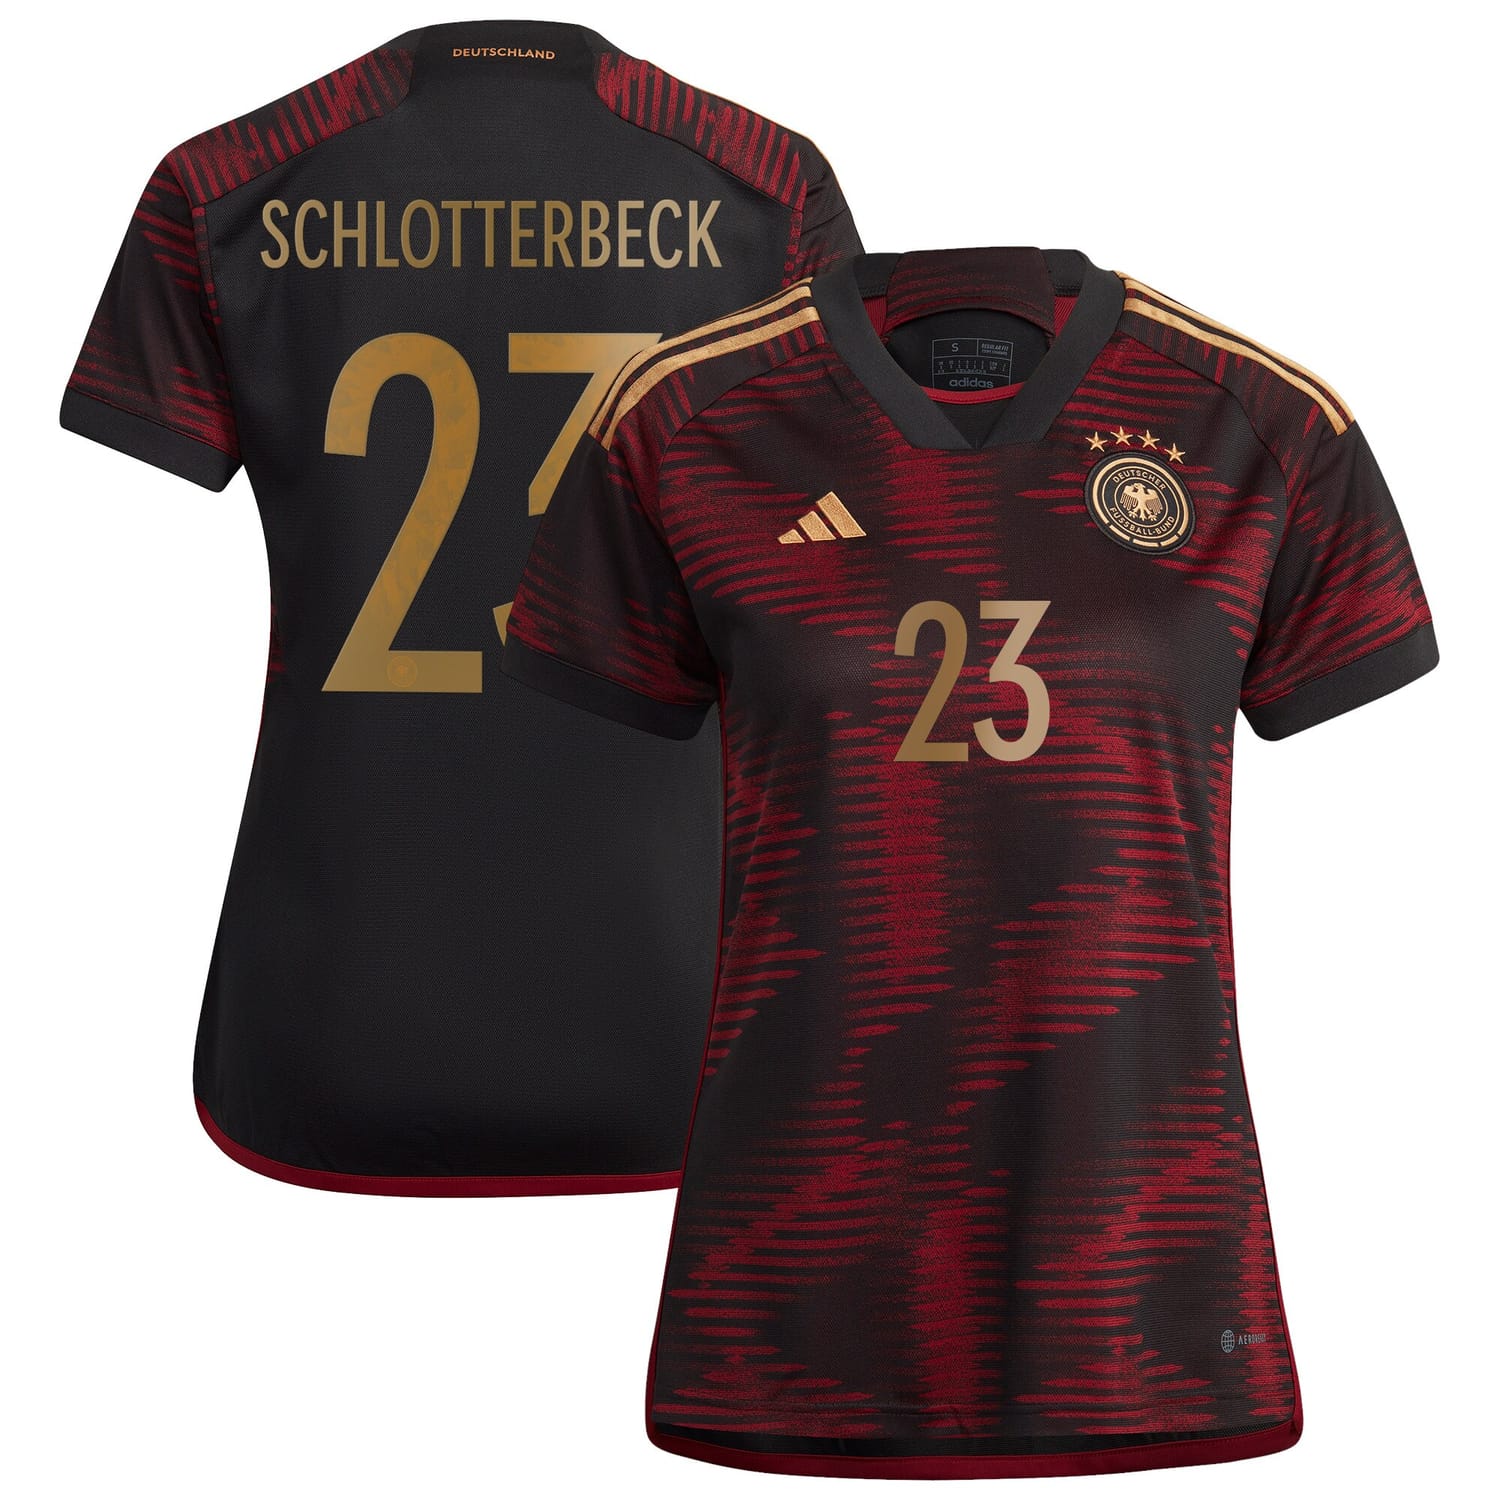 Germany National Team Away Jersey Shirt player Nico Schlotterbeck 23 printing for Women